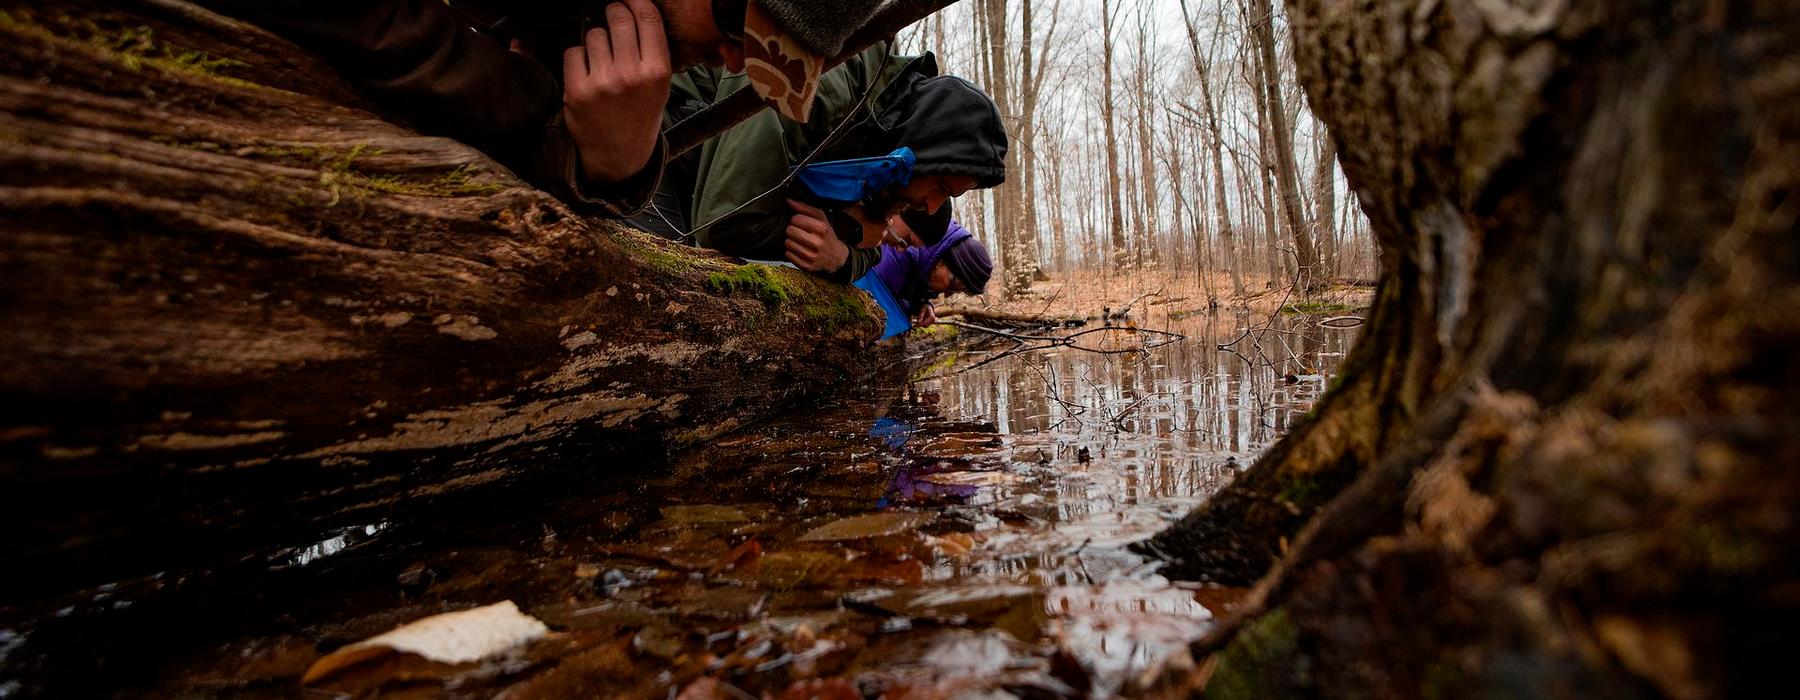 Learn about, explore, and help conserve vernal pools in Michigan this spring